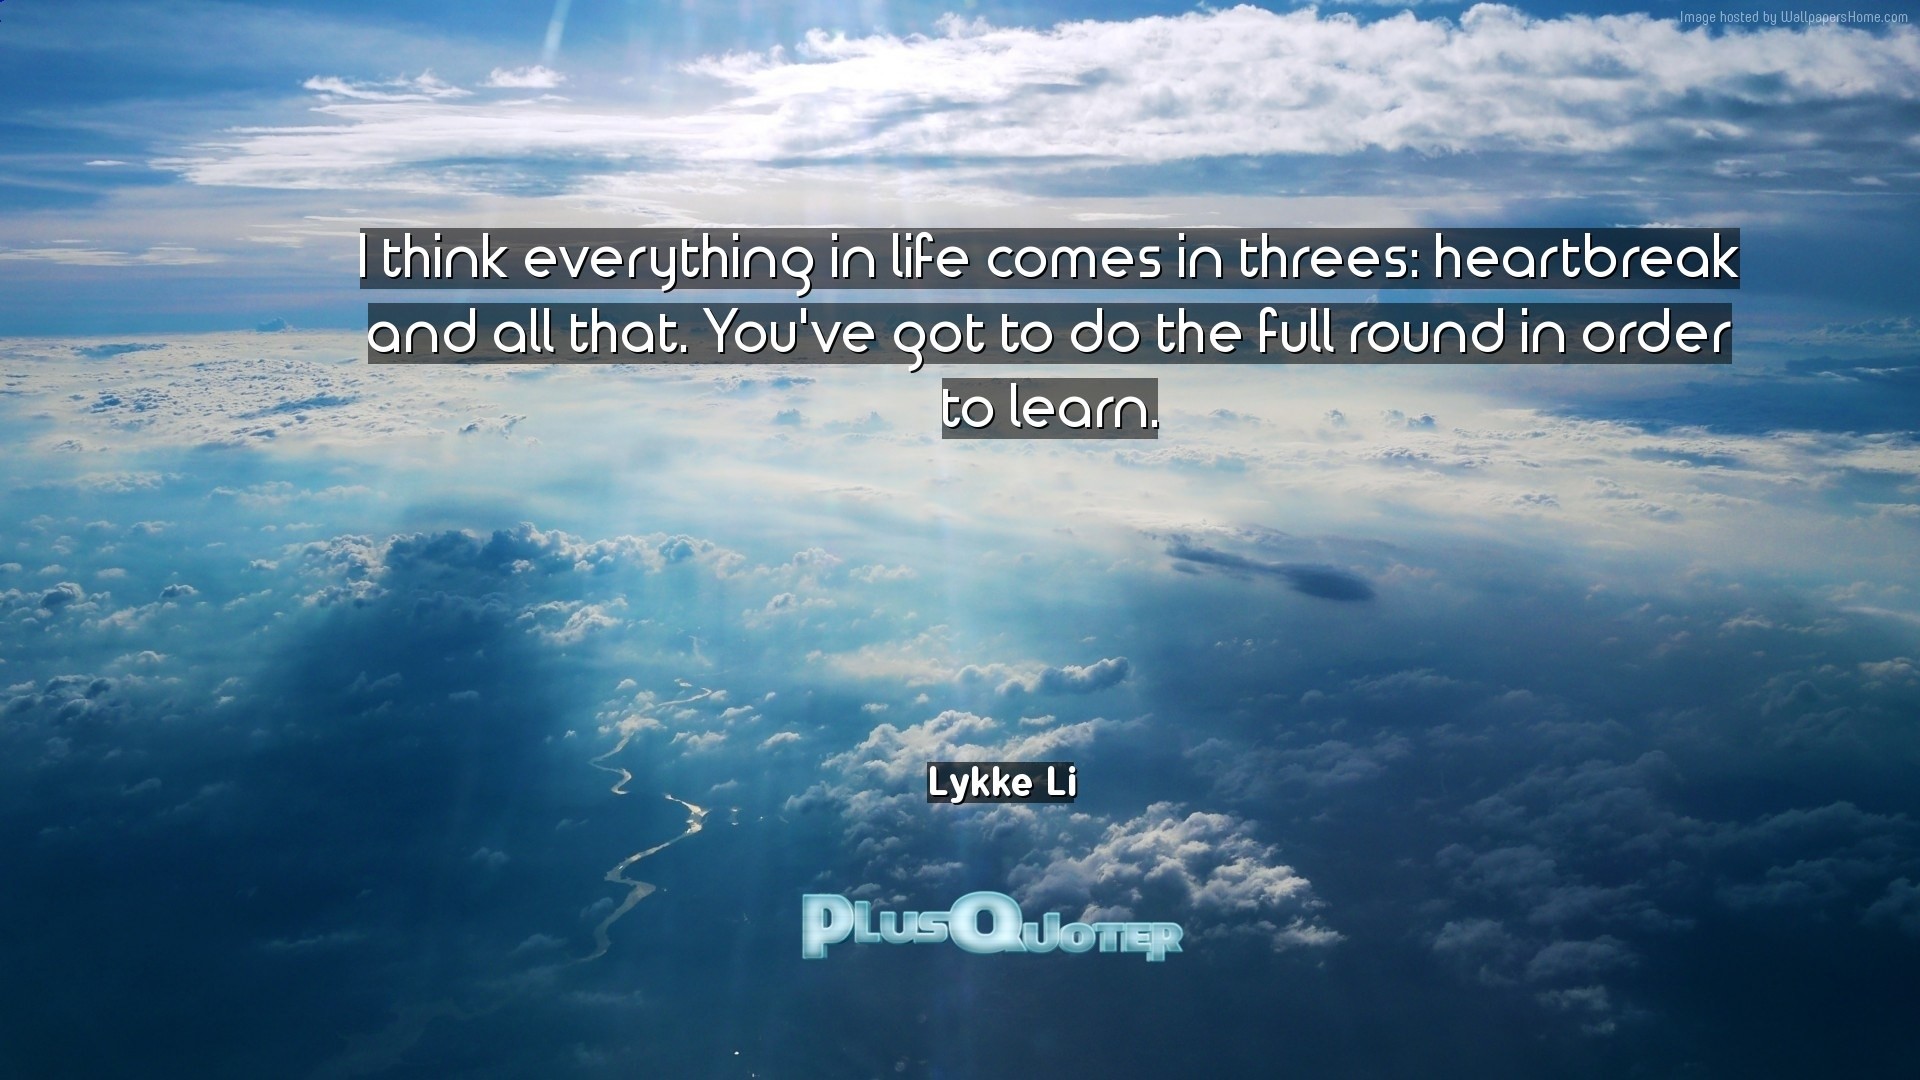 1920x1080 Download Wallpaper with inspirational Quotes- "I think everything in life  comes in threes: